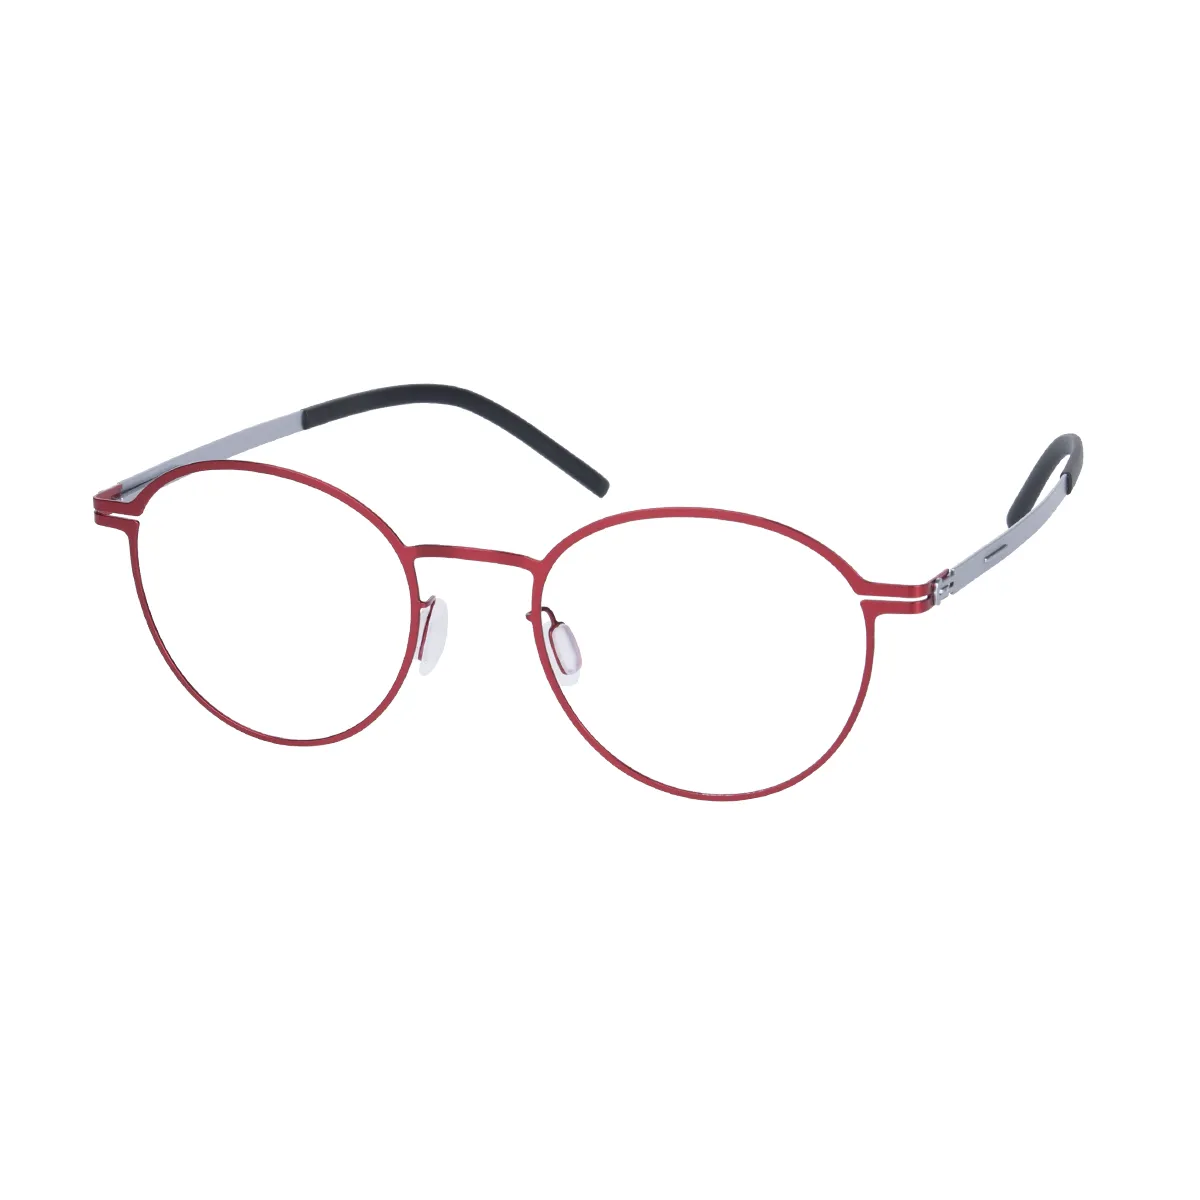 Chris - Round Red Glasses for Women